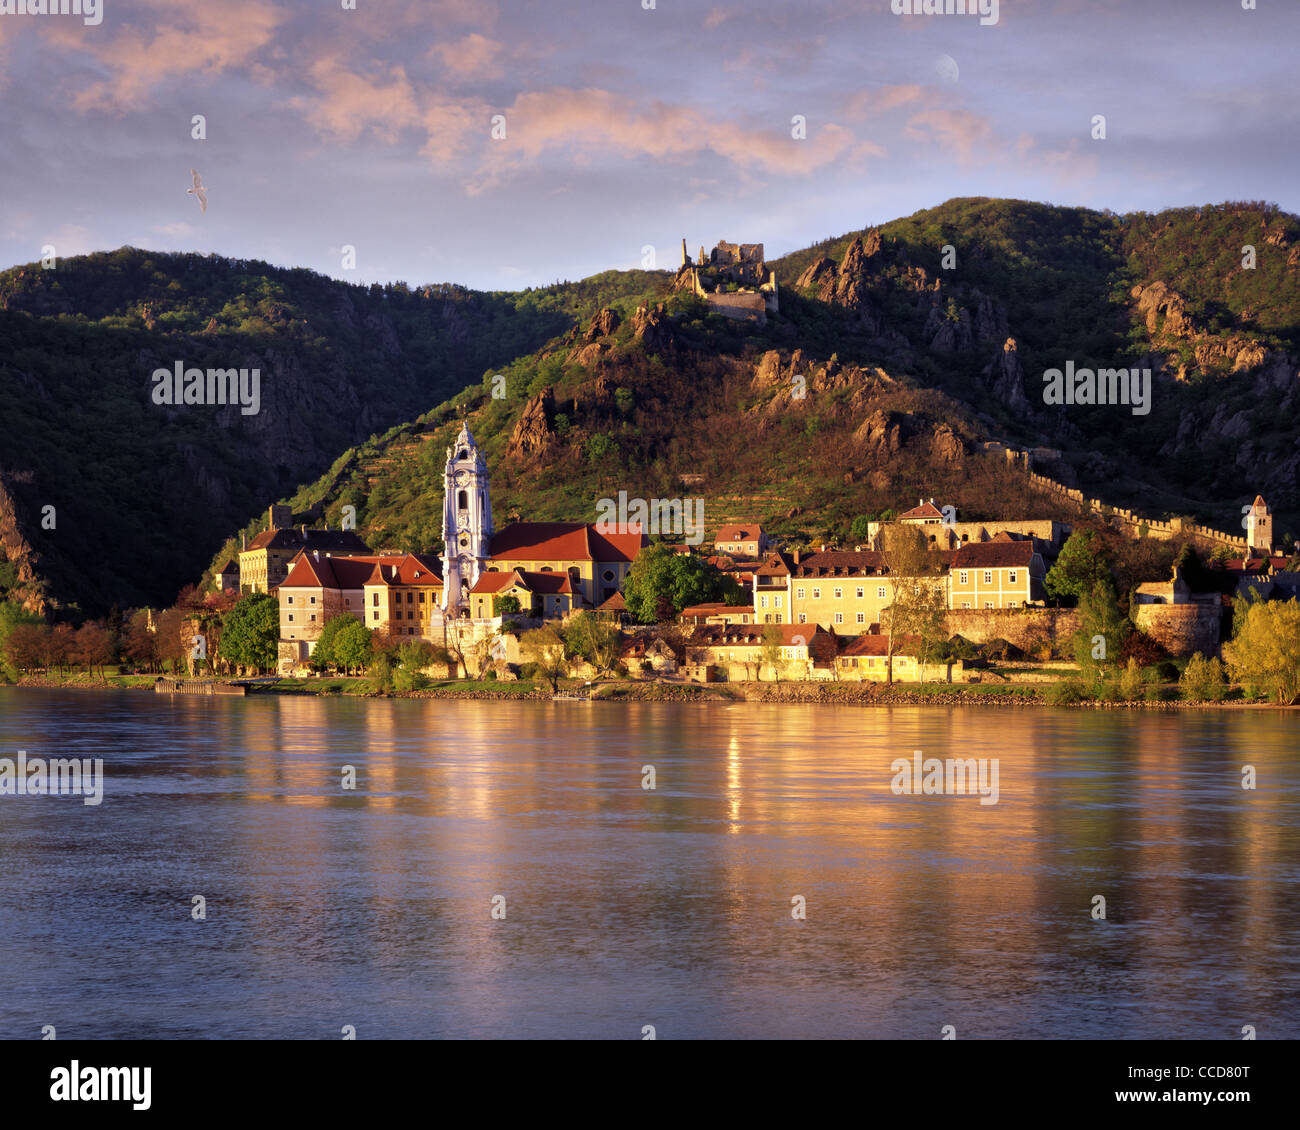 AT - LOWER AUSTRIA: Duernstein and River Danube Stock Photo